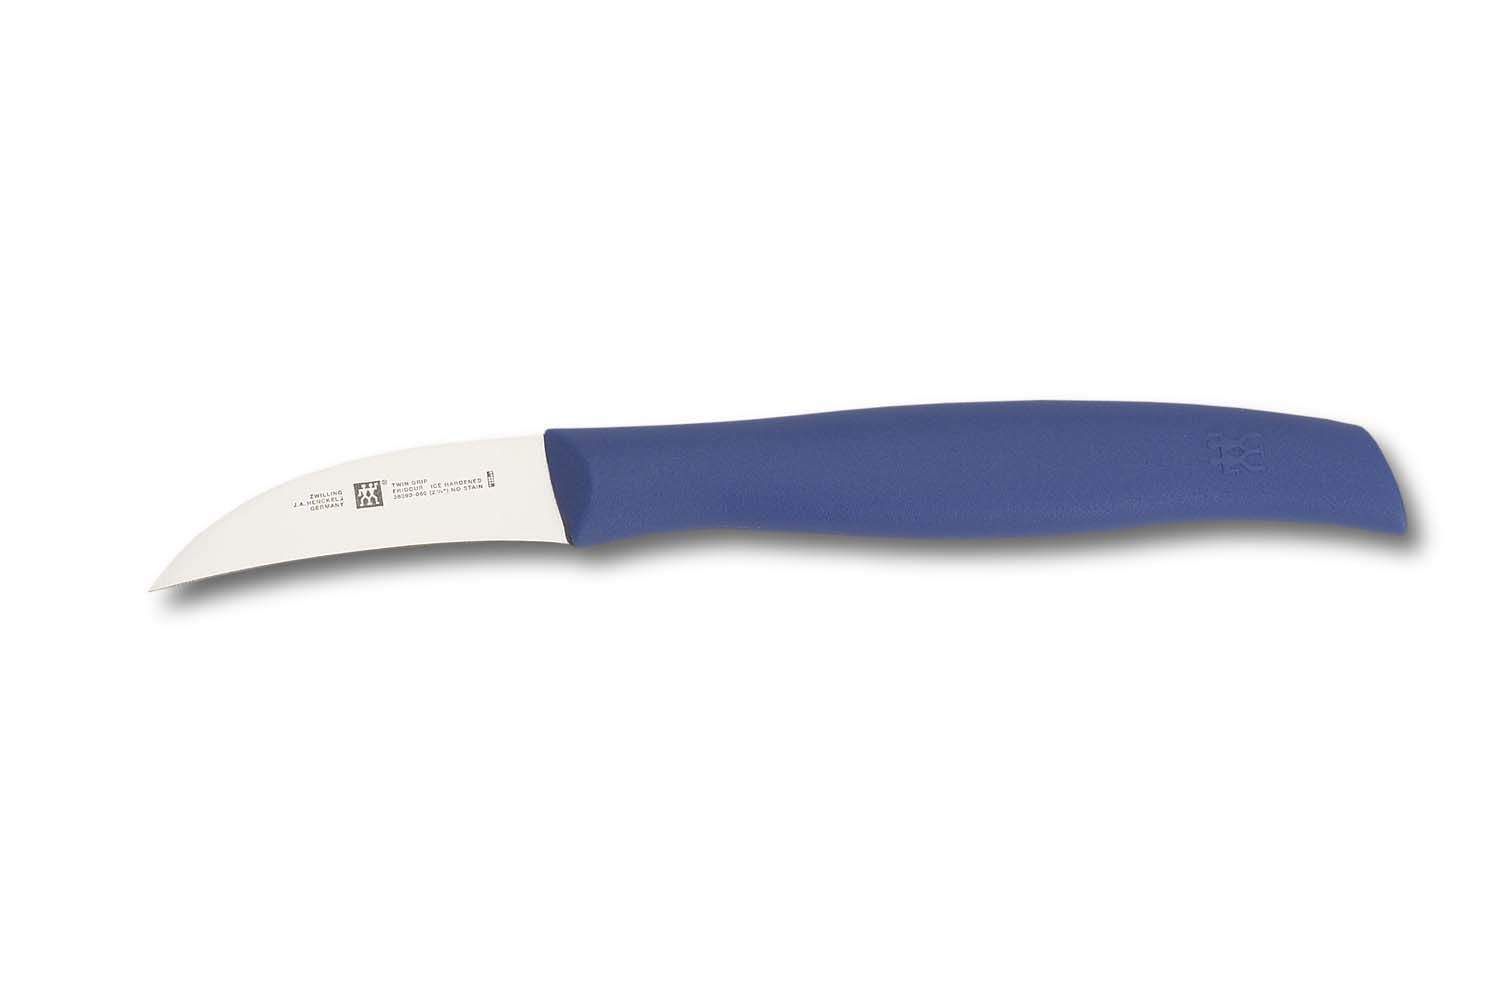 Zwilling J.A. Henckels Twin Grip 3.5-inch Paring Knife - Green